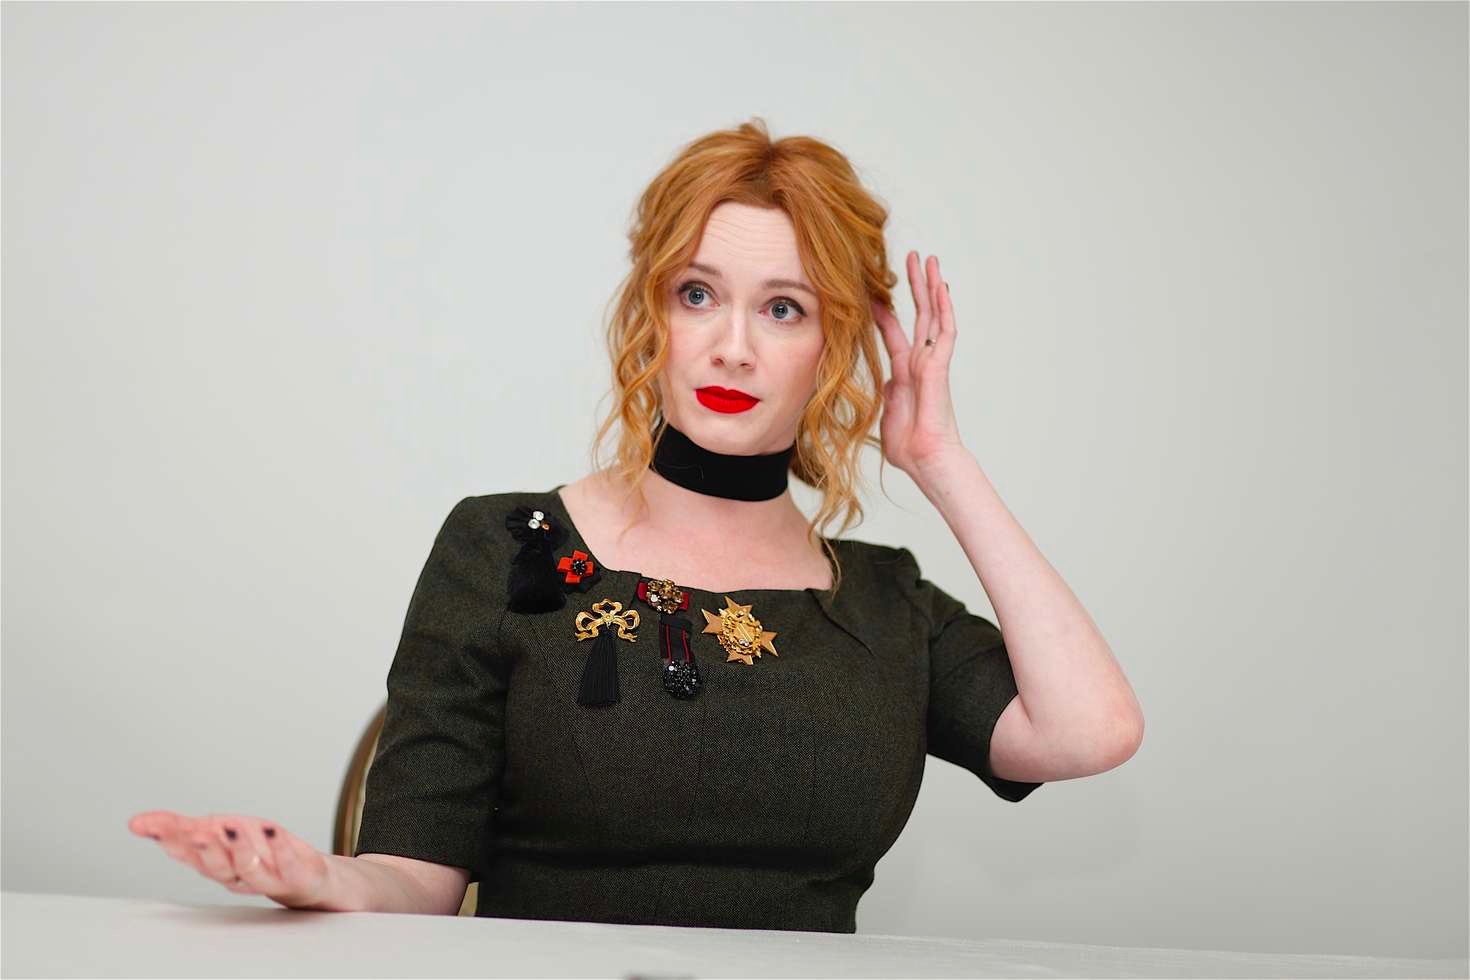 Wishing everyone a happy holidays, by which I of course mean Christina Hendricks Birthday 